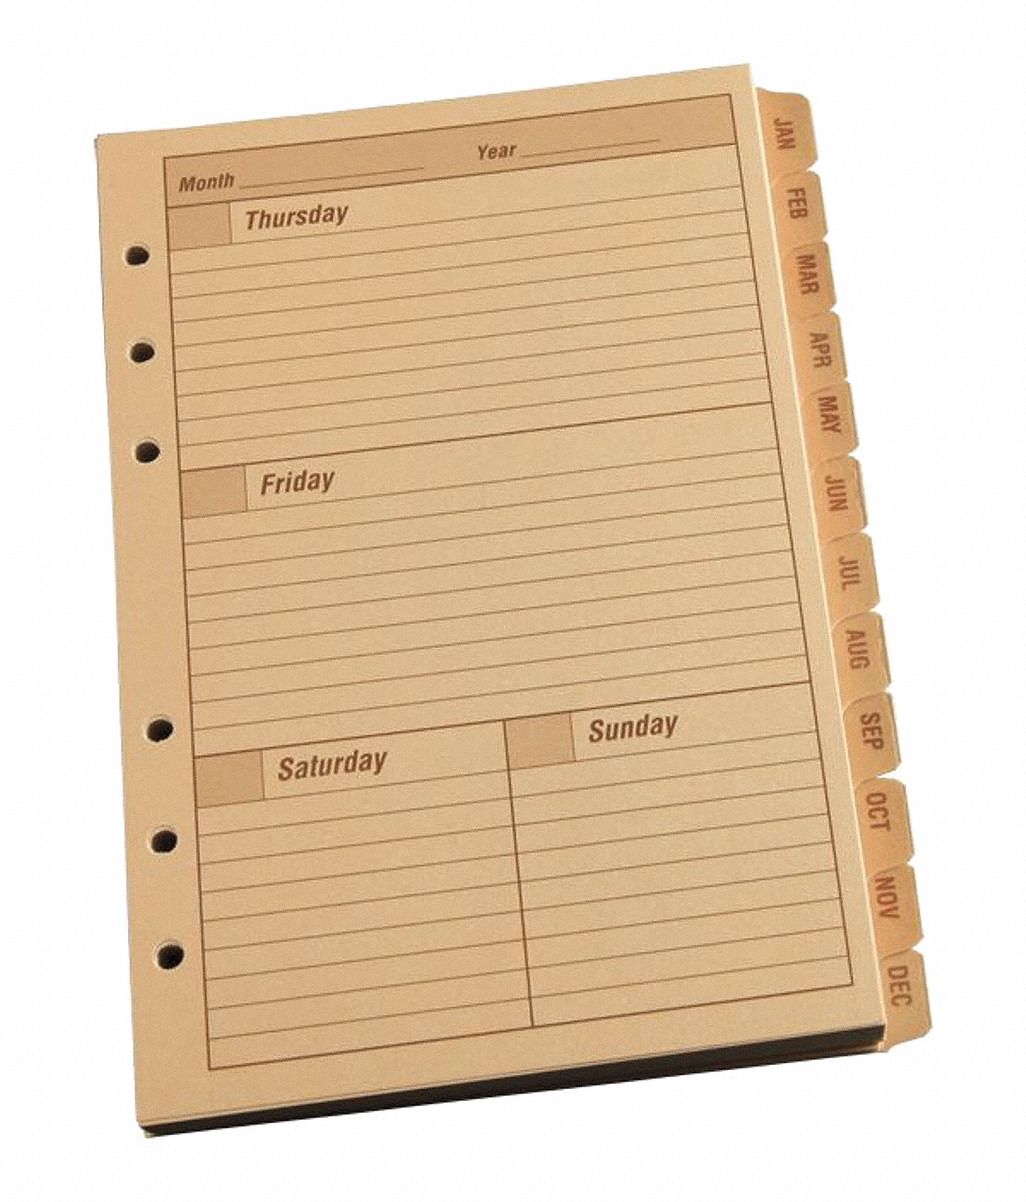 18A134 - Planner Calendar Pages Weekly 5 x 7 in